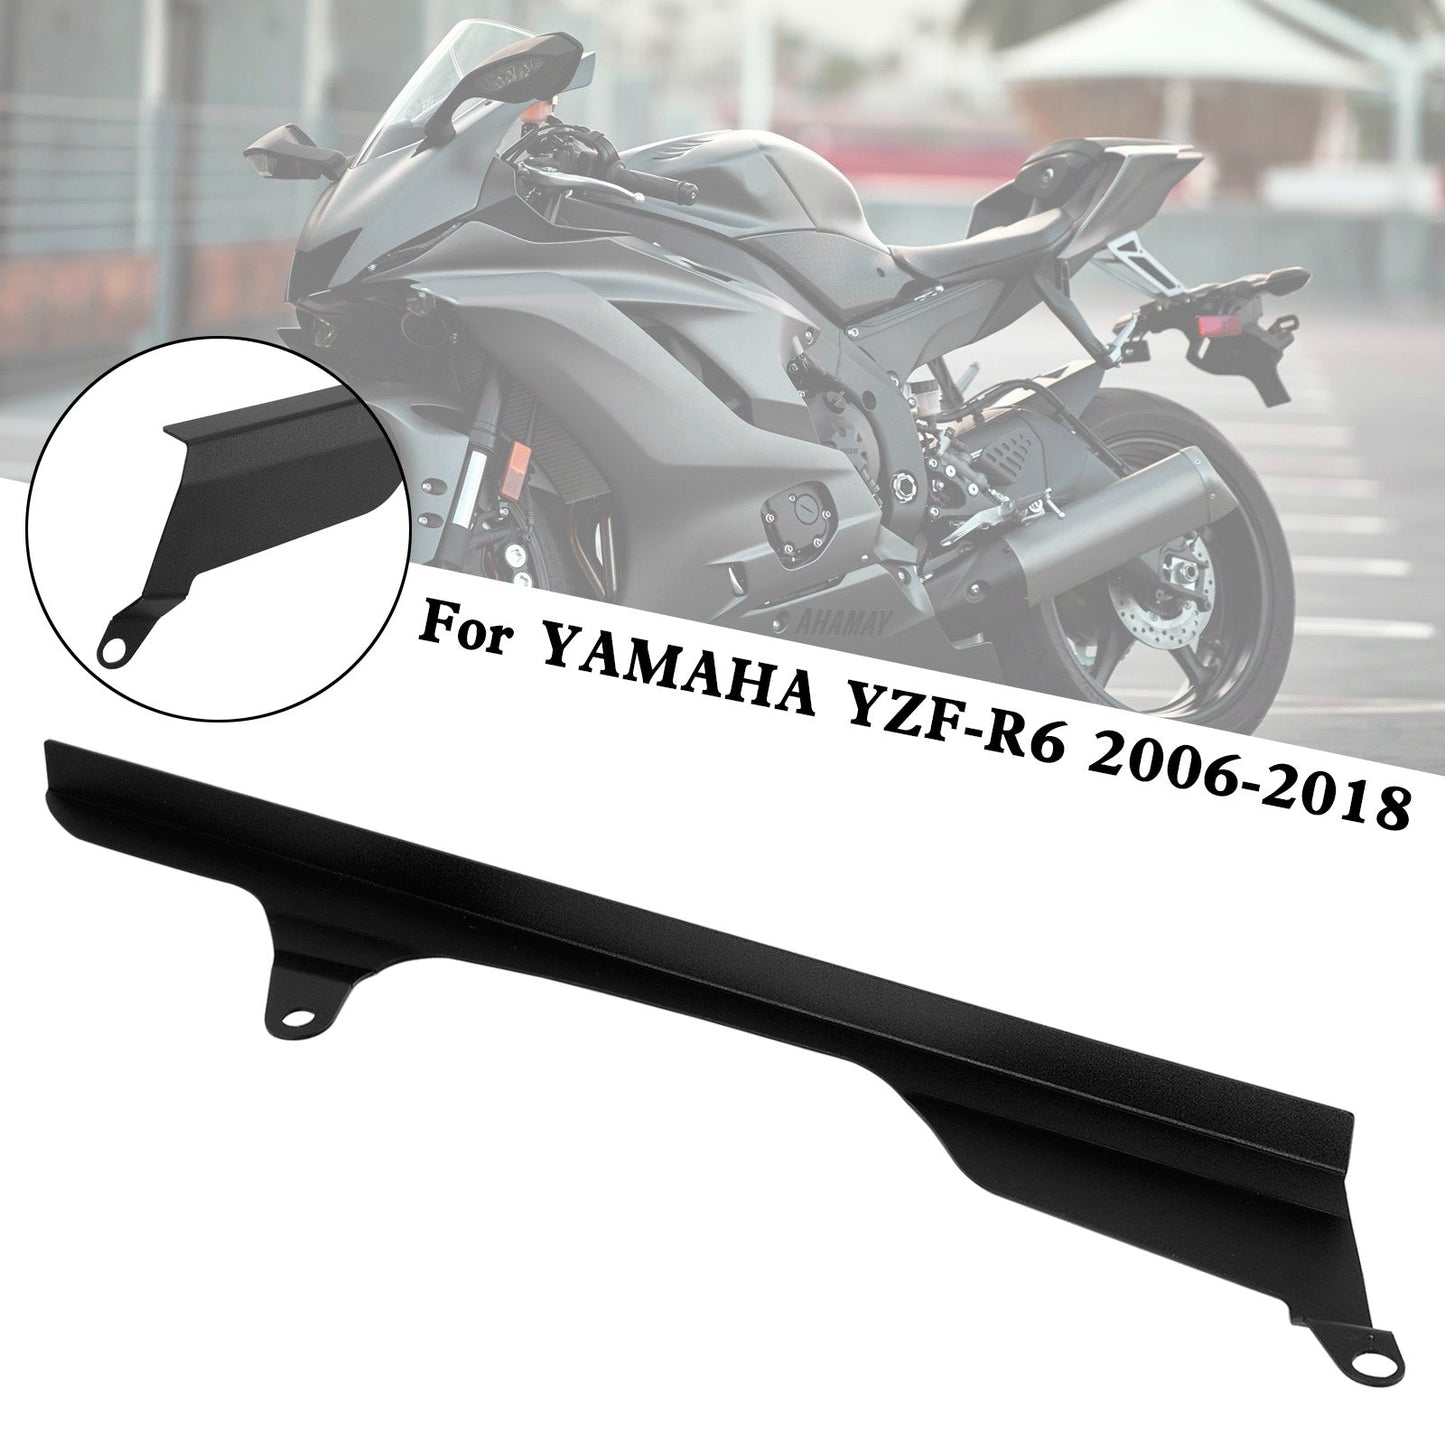 Rear Sprocket Chain Guard Protector Cover For YAMAHA YZF R6 2006-2018 Black